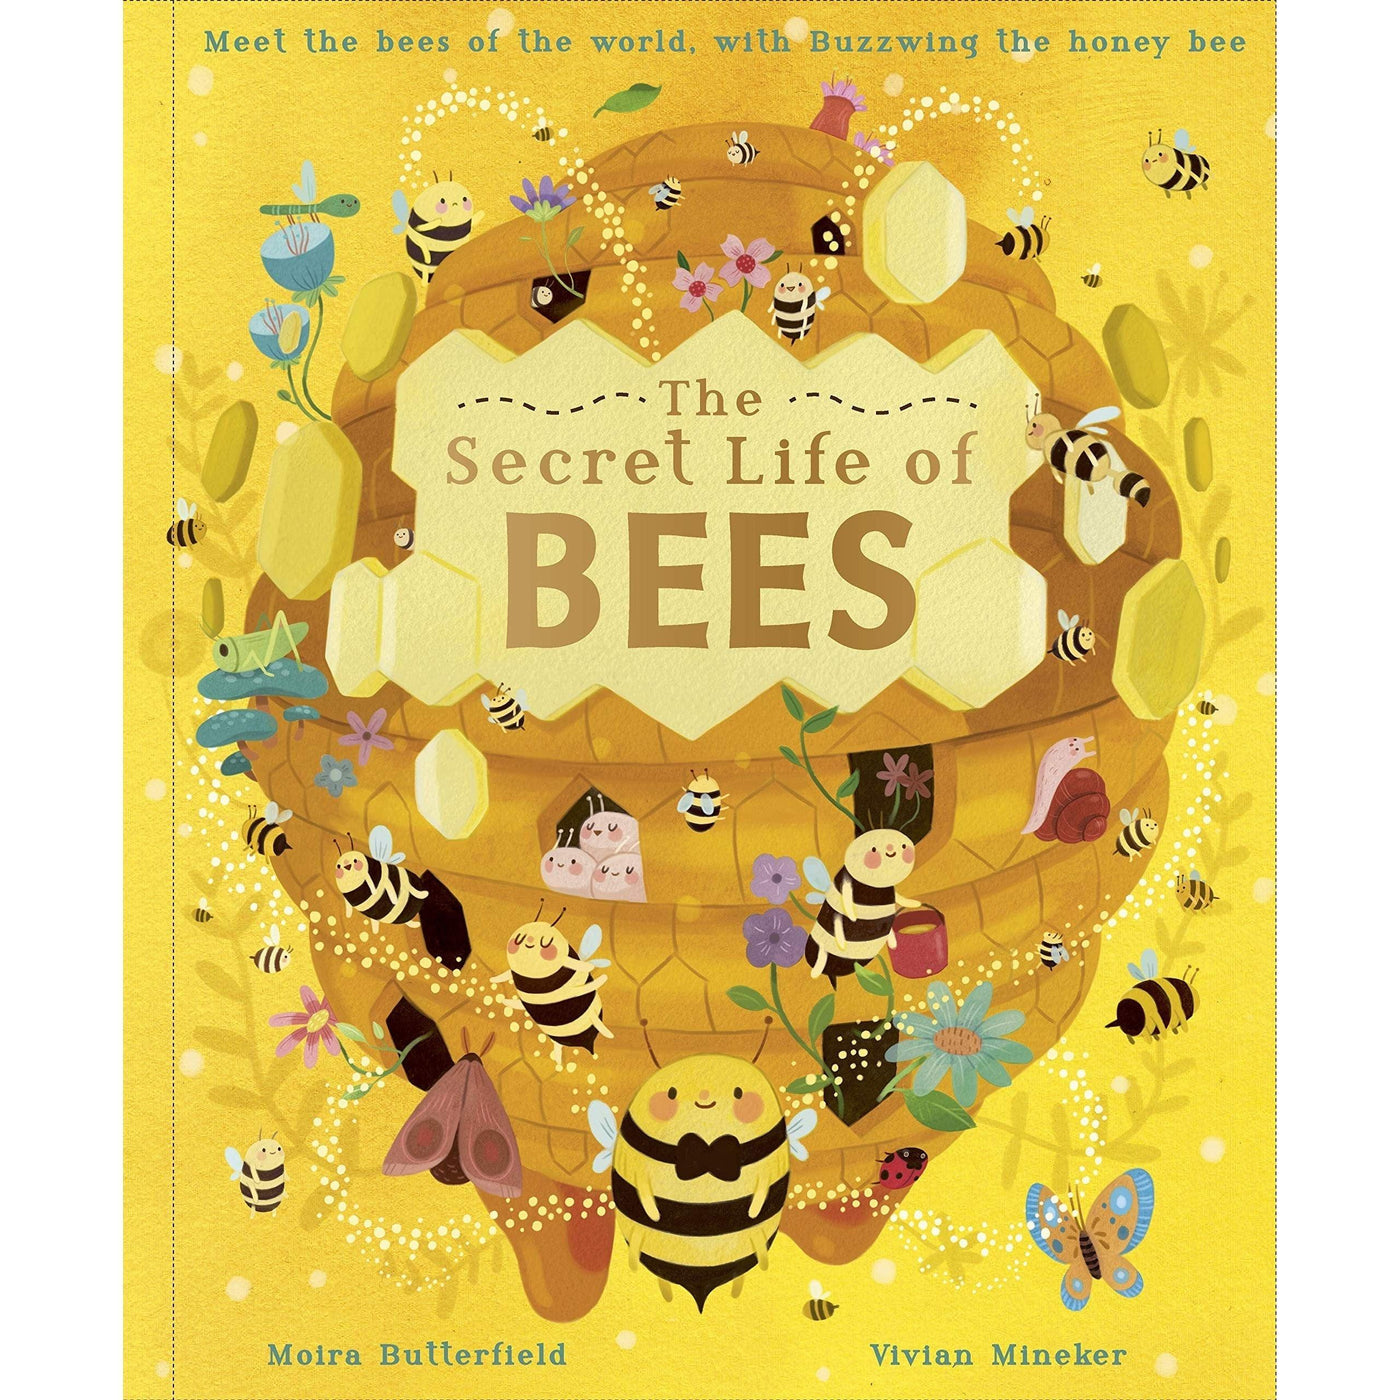 The Secret Life Of Bees: Meet The Bees Of The World, With Buzzwing The Honeybee: Volume 2